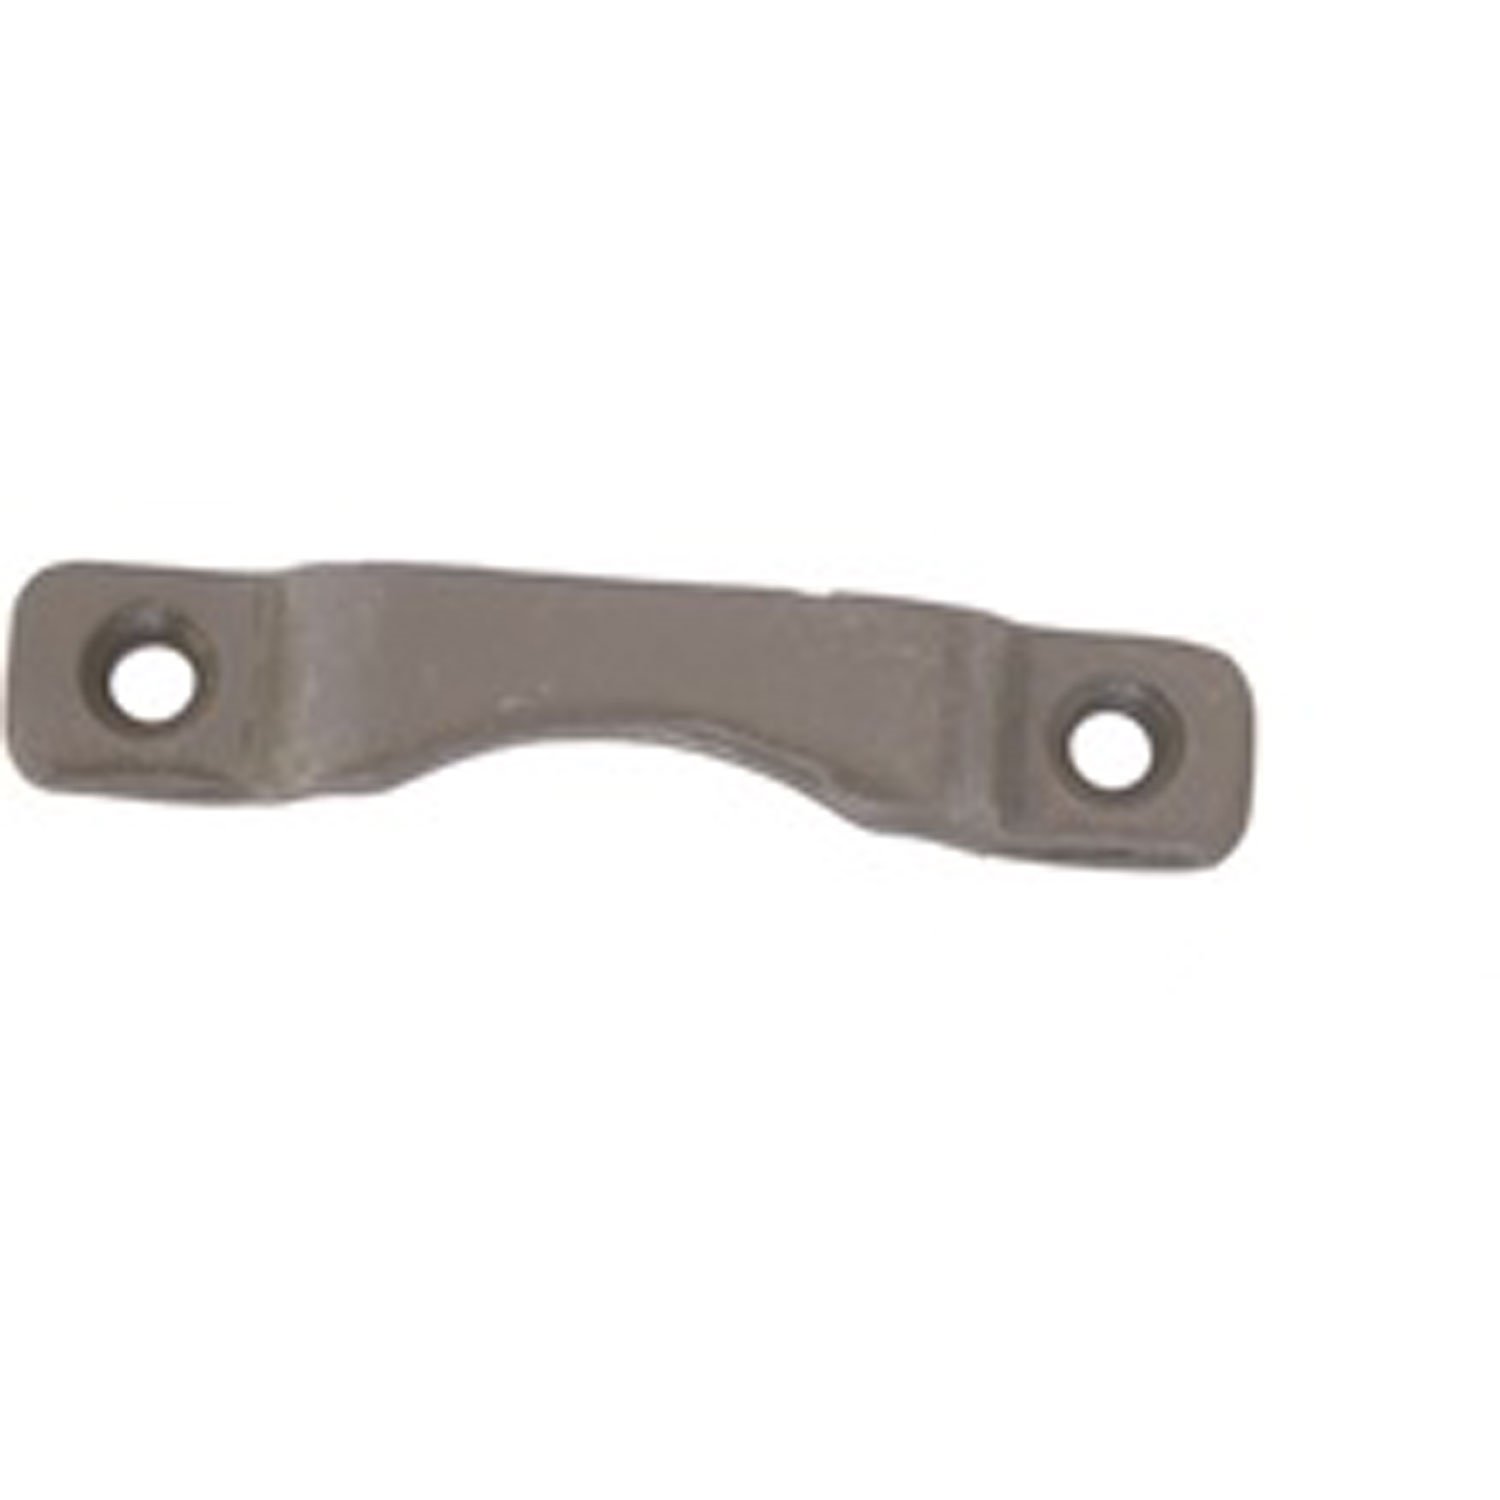 Replacement windshield catch bracket from Omix-ADA, Fits 41-45 Willys MB and Ford GPW., Fits left or right sides.